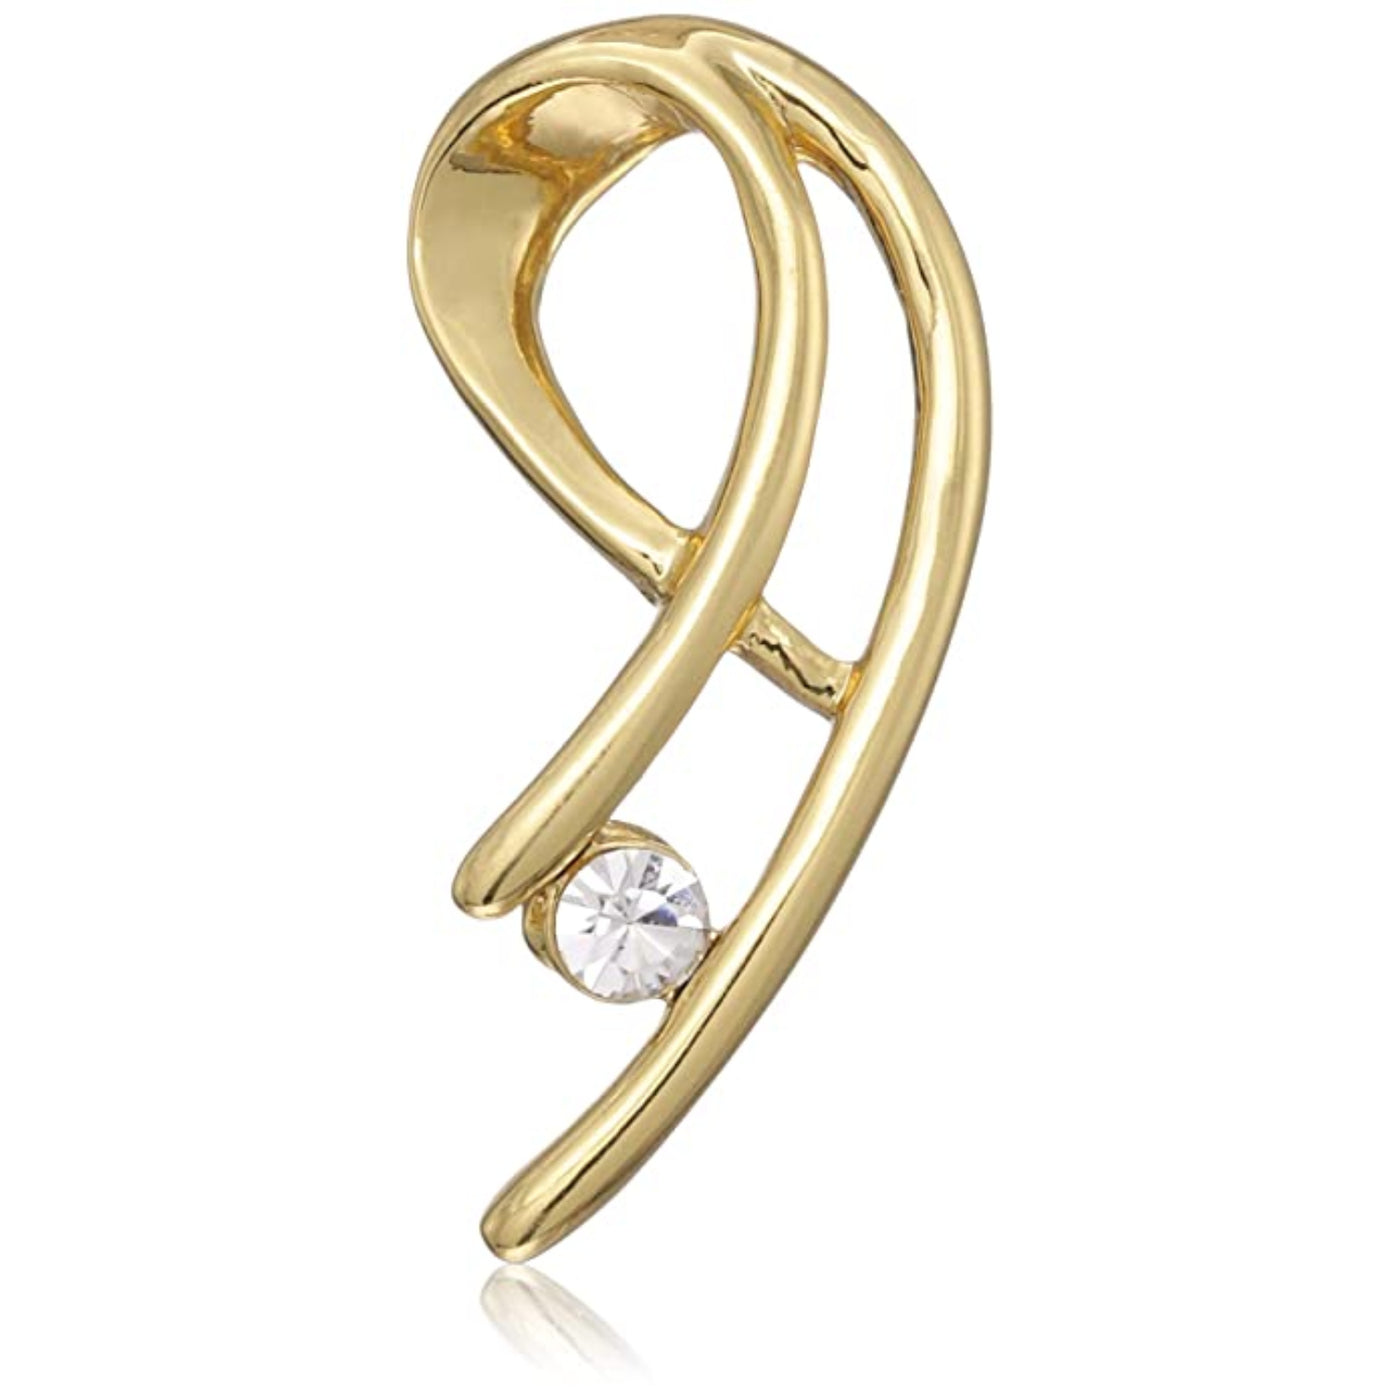 Estele gold plated curved pendant with white stone for women